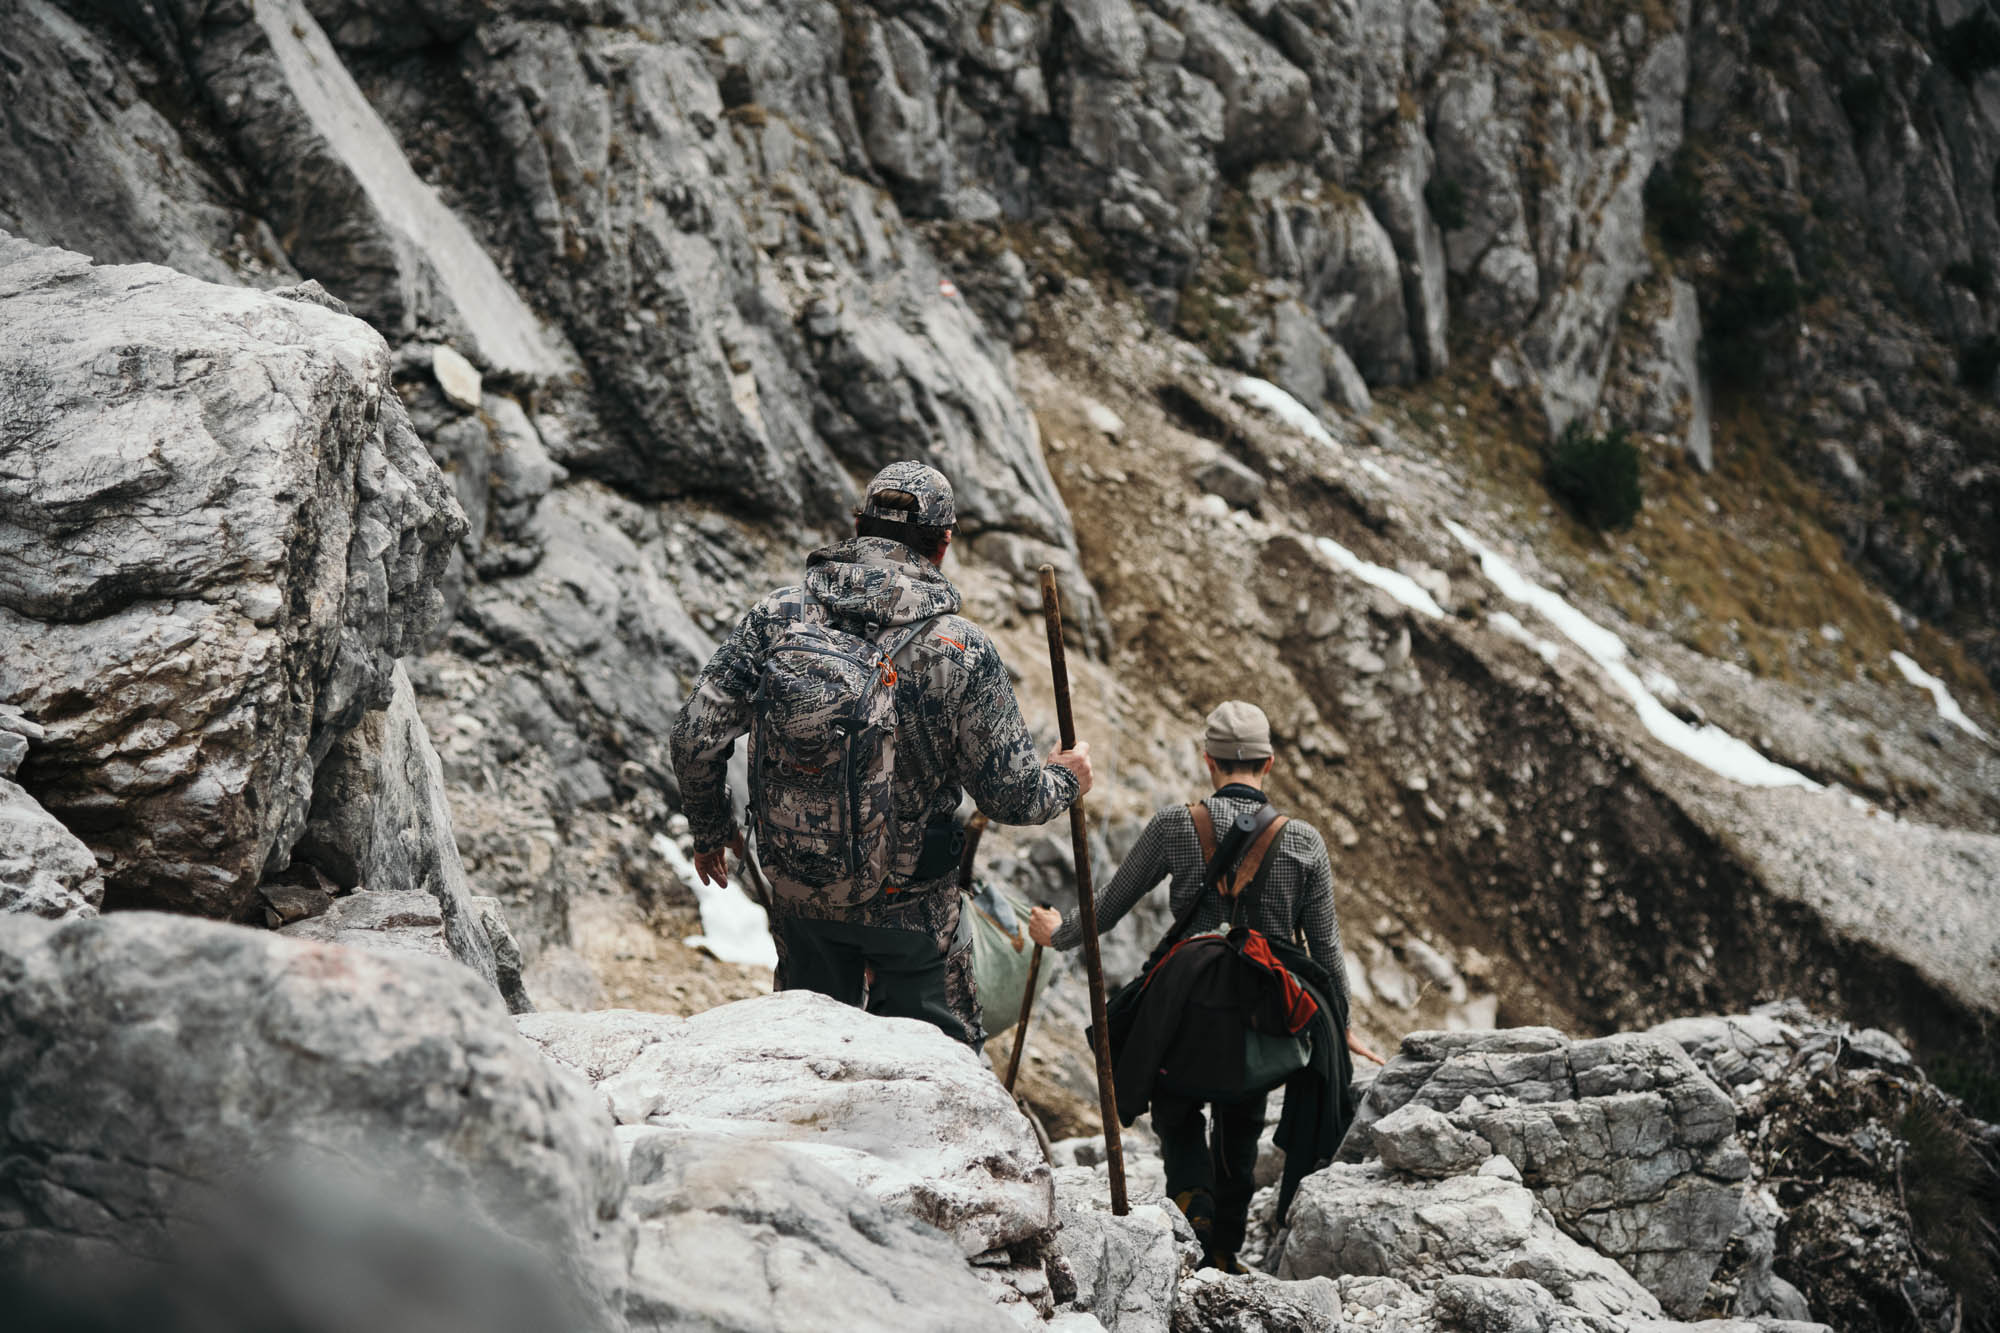 On the hunt for chamois - Dive into our adventure of hunting chamois in the Hinterautal valley this autumn. Now, we can truly appreciate the breathtaking mountain scenery, the fresh memories of a successful hunt still lifting our spirits.